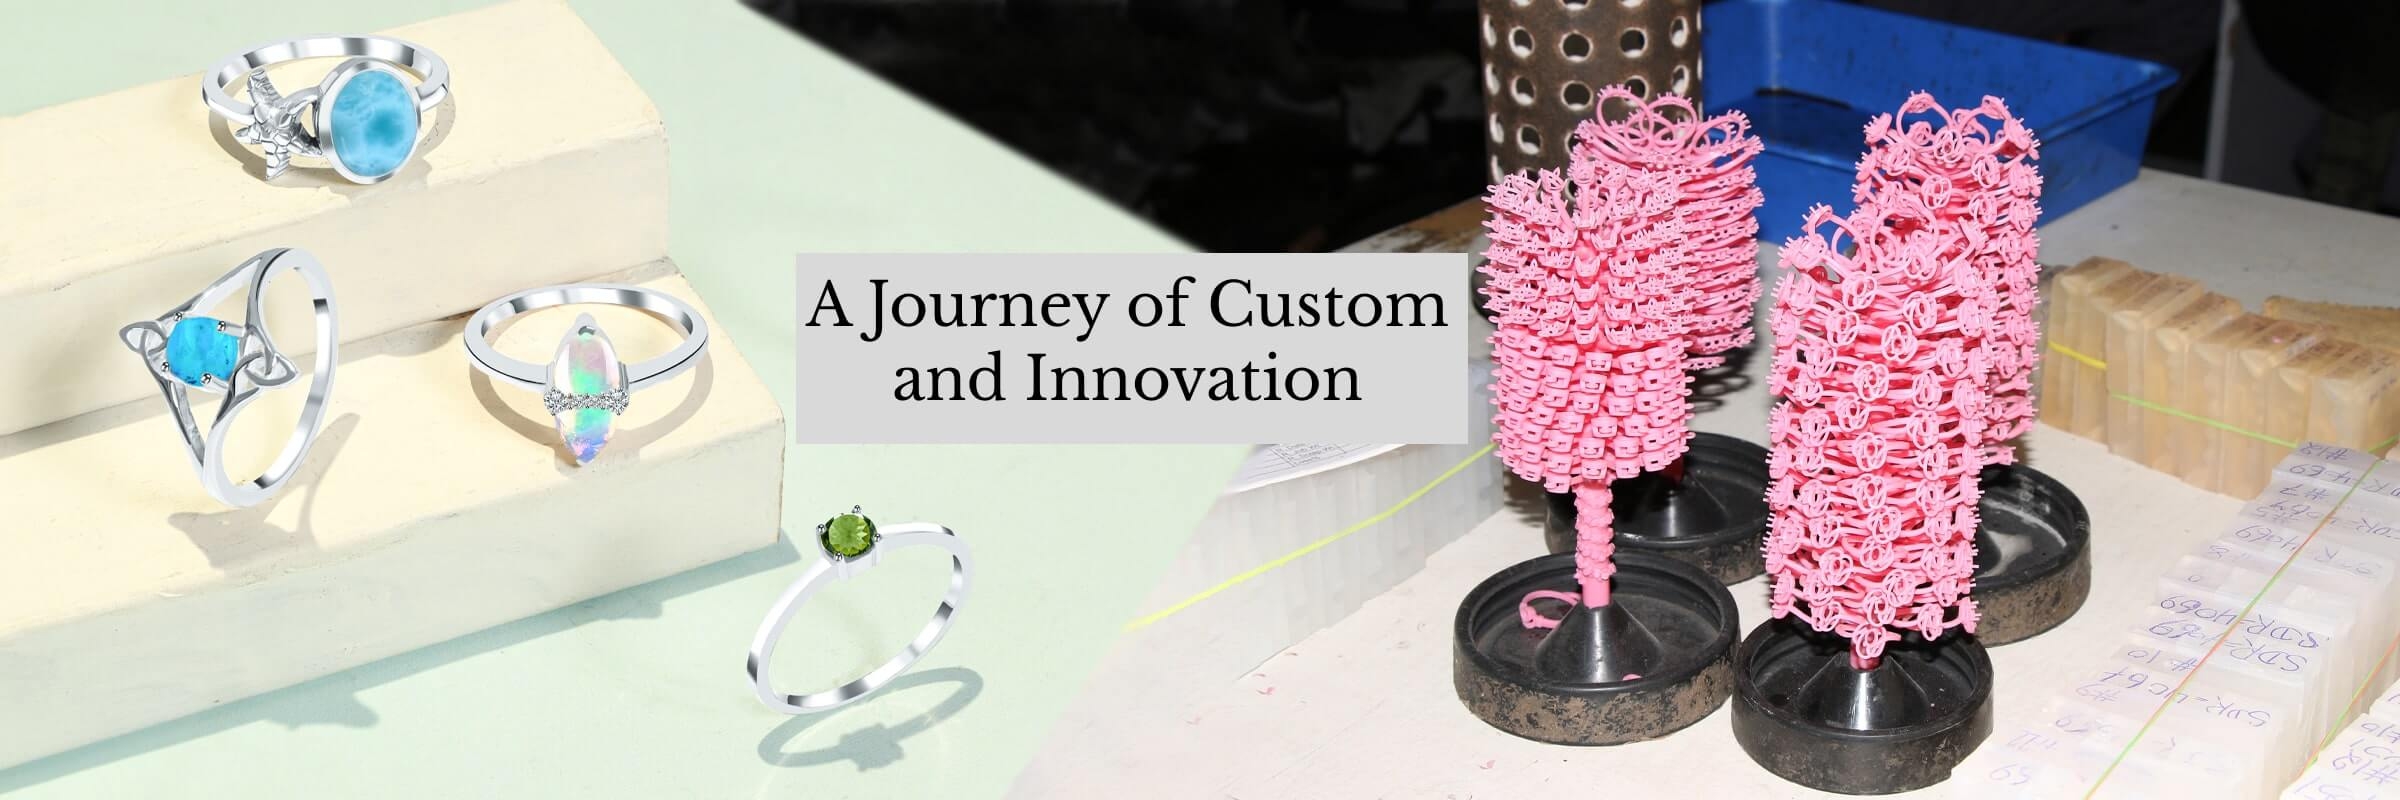 Custom and Innovation at a Crossroads